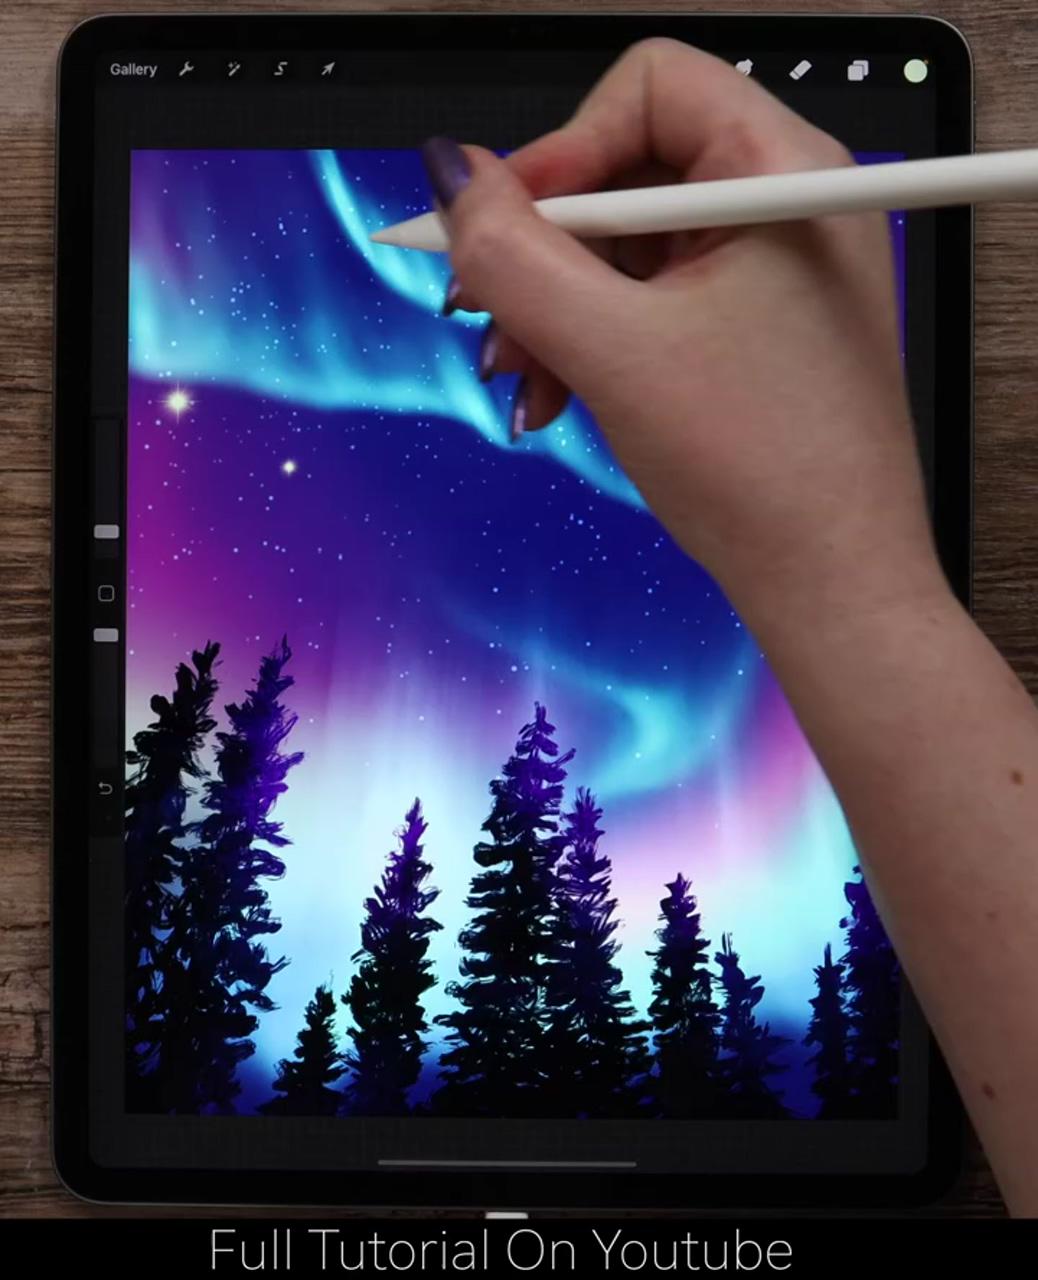 Northern lights drawing tutorial in procreate + free brushes; cute girl illustration //step-by-step procreate tutorial